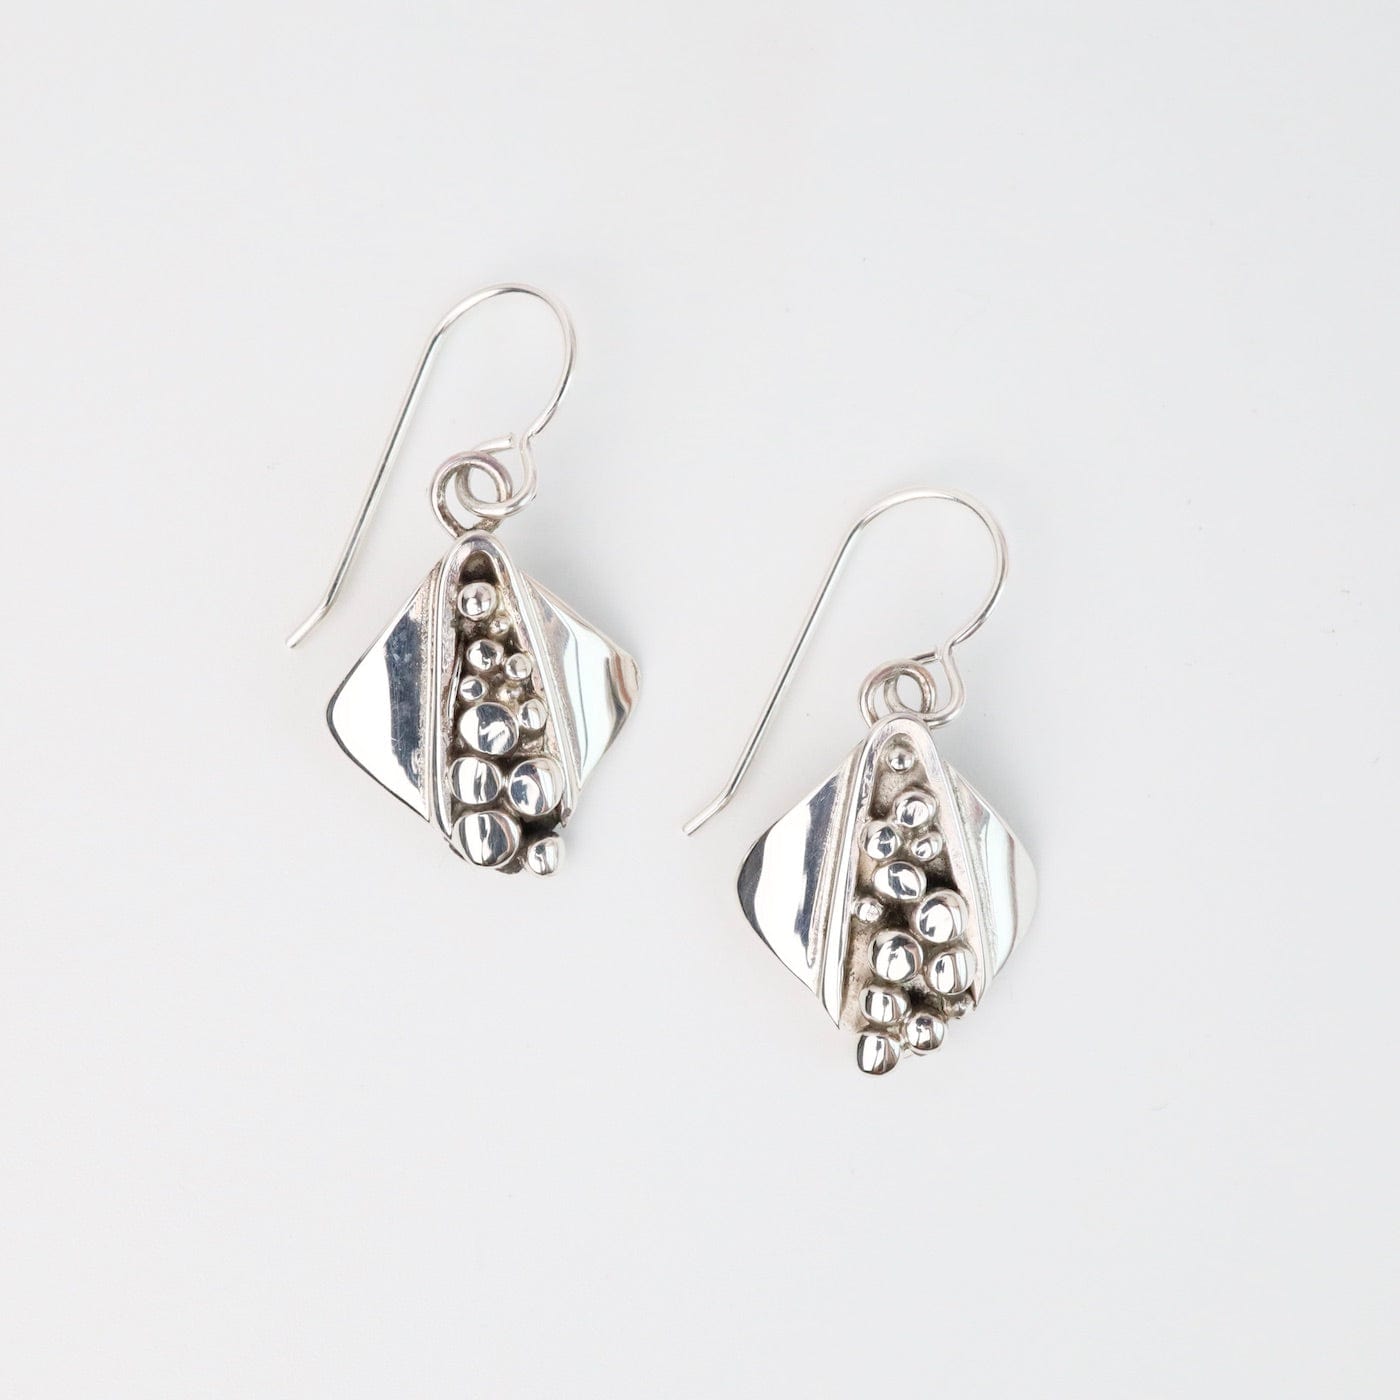 EAR Square Drop Earrings with Textured Lines & Flat Balls